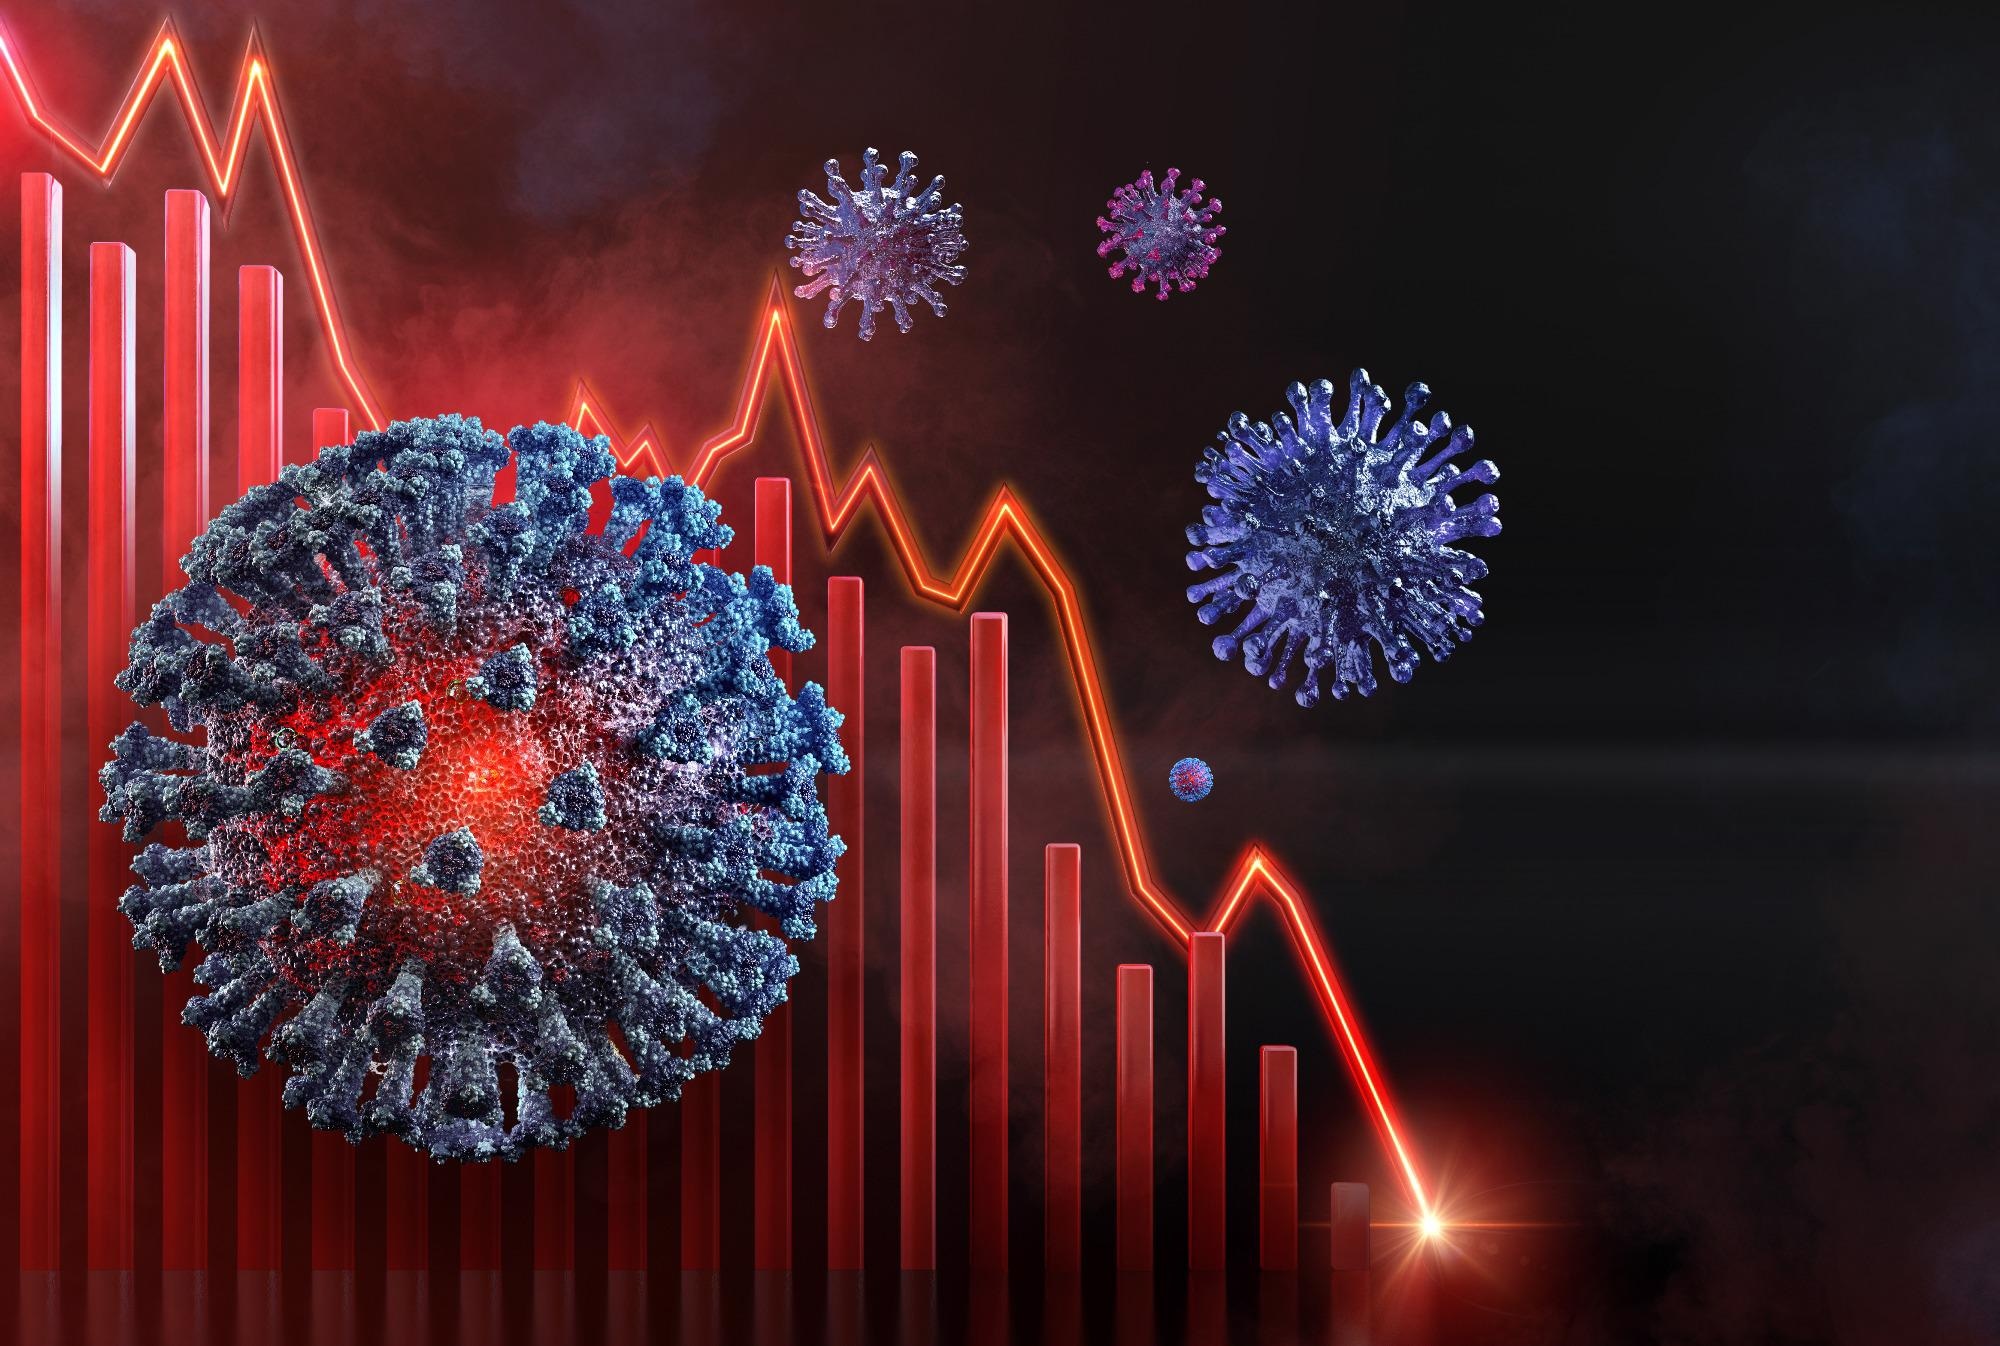 Study: The cost of the COVID-19 pandemic versus the cost-effectiveness of mitigation strategies in EU, UK, EEA and OECD countries: a systematic review.  Image Credit: Corona Borealis Studio / Shutterstock